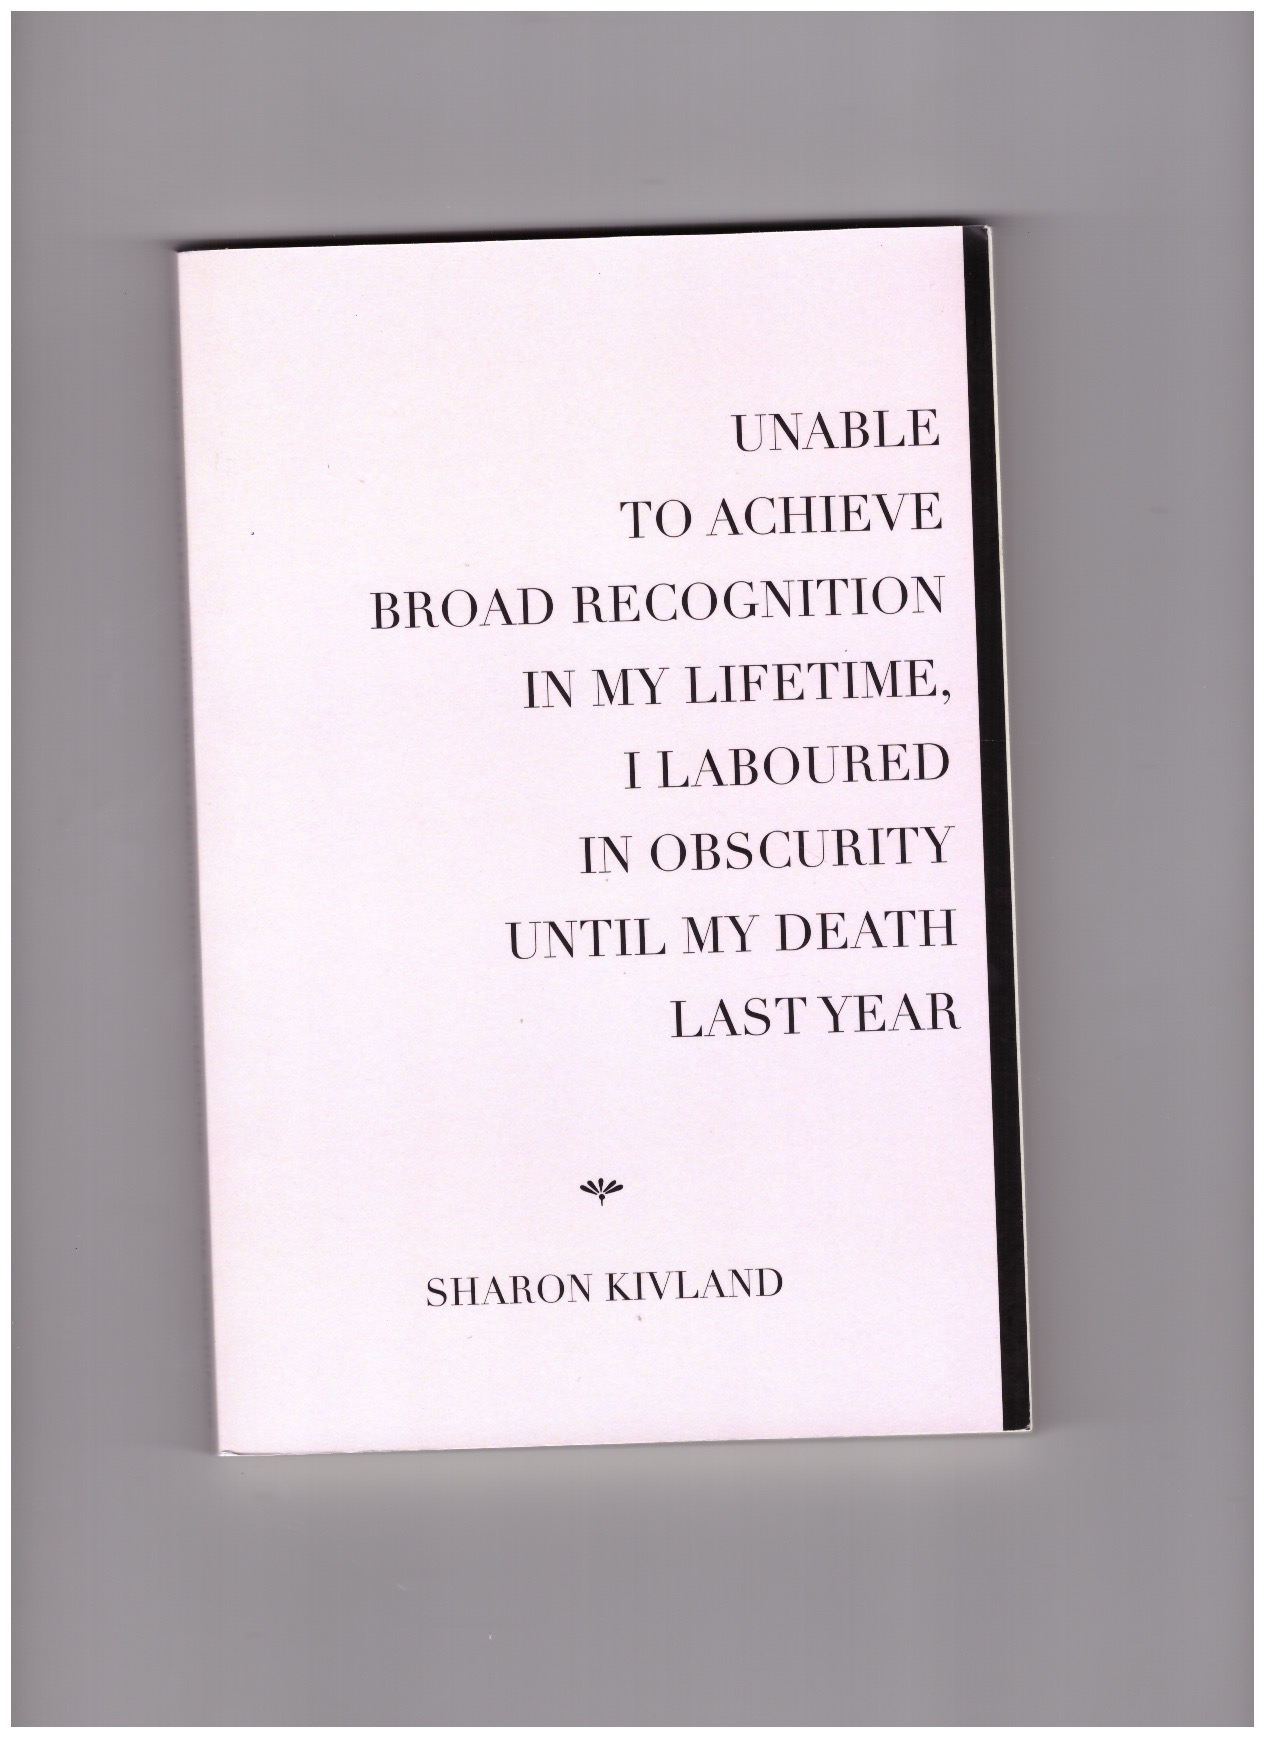 KIVLAND, Sharon - Unable to achieve broad recognition in my lifetime, I laboured in obscurity until my death last year